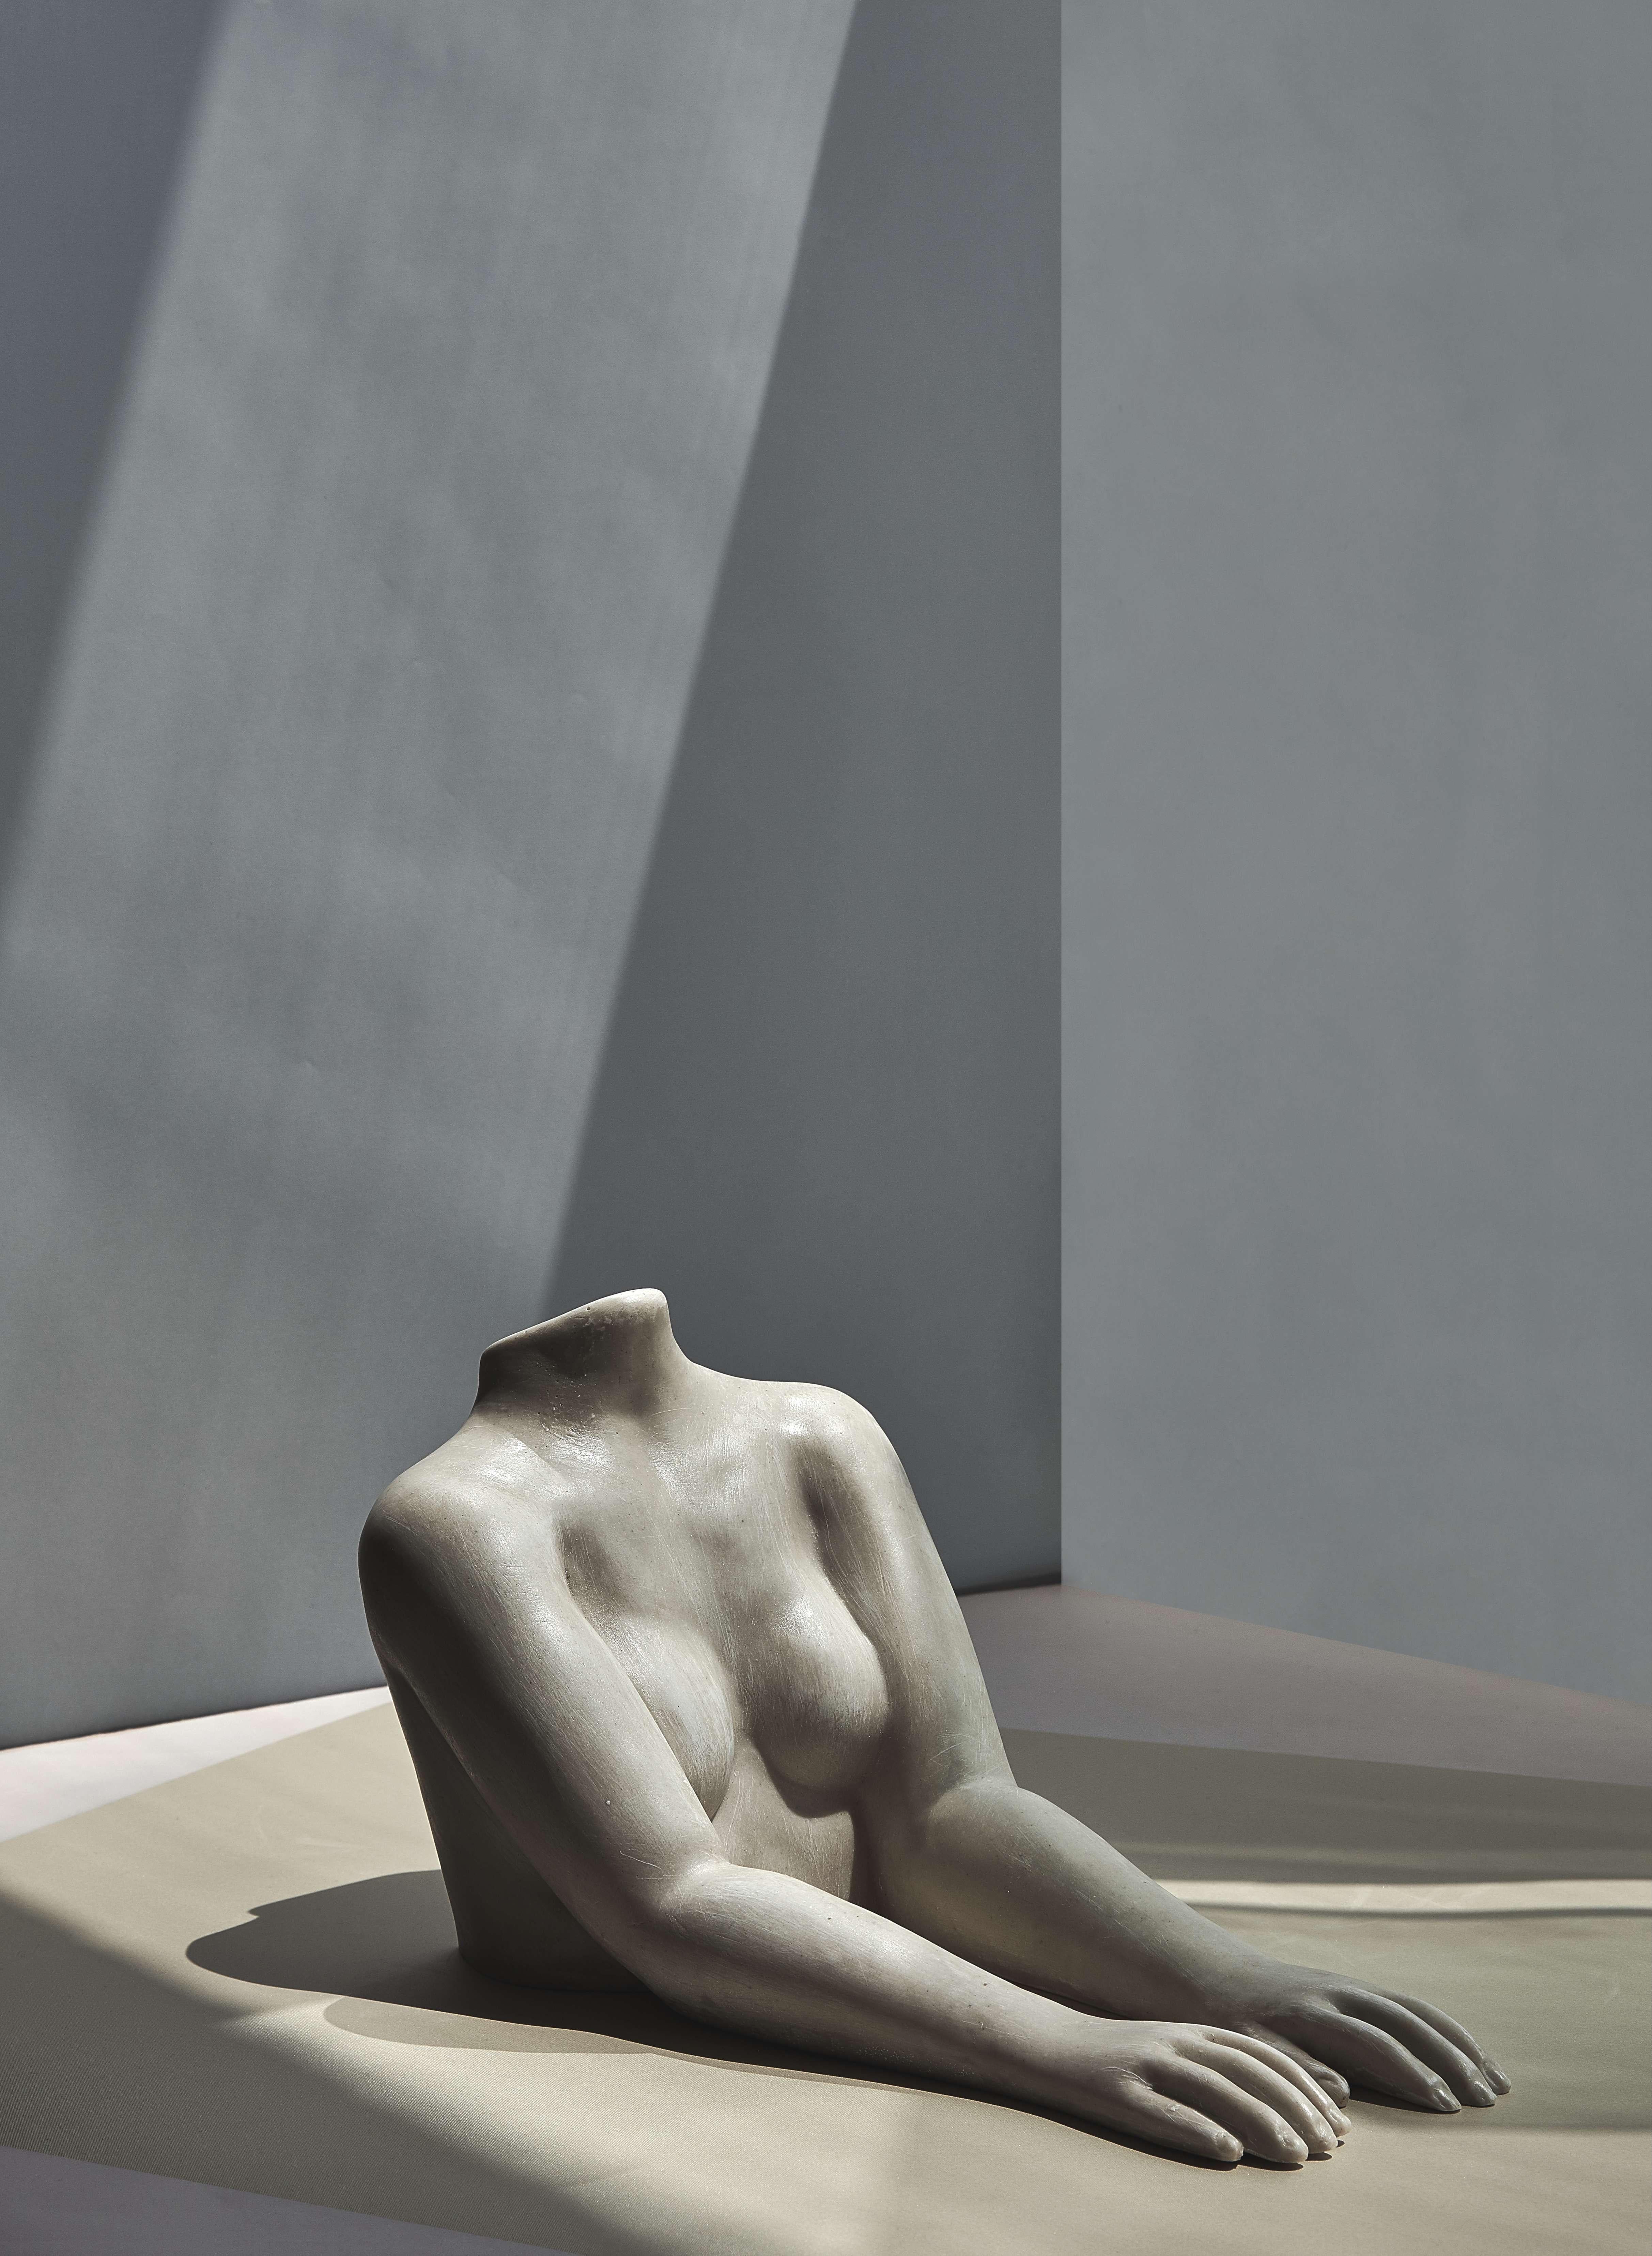 Our Il Corpo sculpture is a set of two individual sculptures portraying the upper and lower body parts. It was designed to be used as a bookend but possibilities are endless with this piece.

This collection is inspired by the seducing form of the